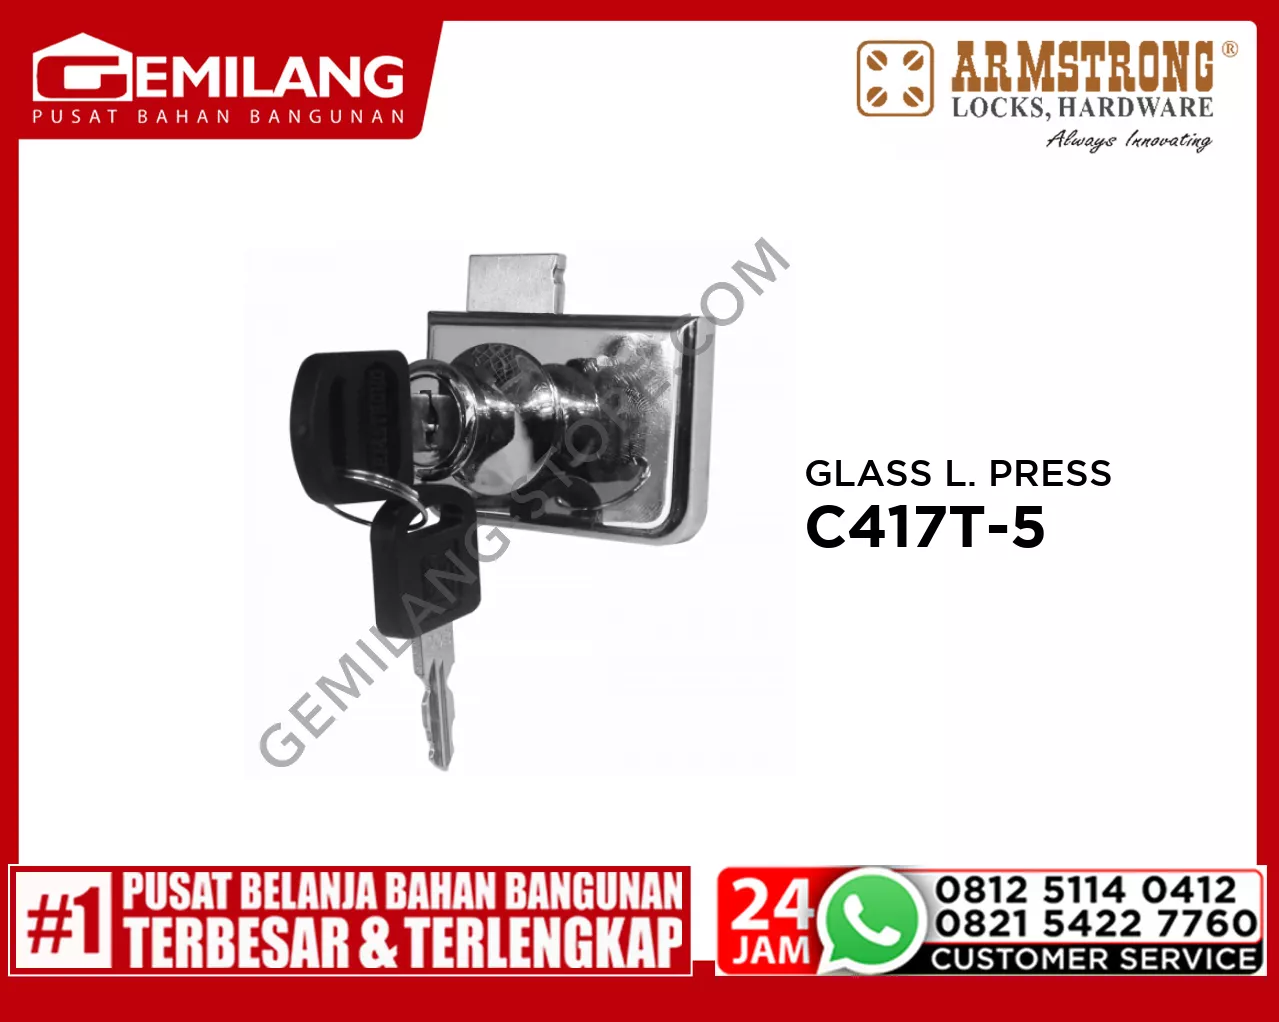 ARMSTRONG GLASS LOCK PRESS C417T-5 DOUBLE RECTANGLE 5-6mm CH ZINC ALLOY